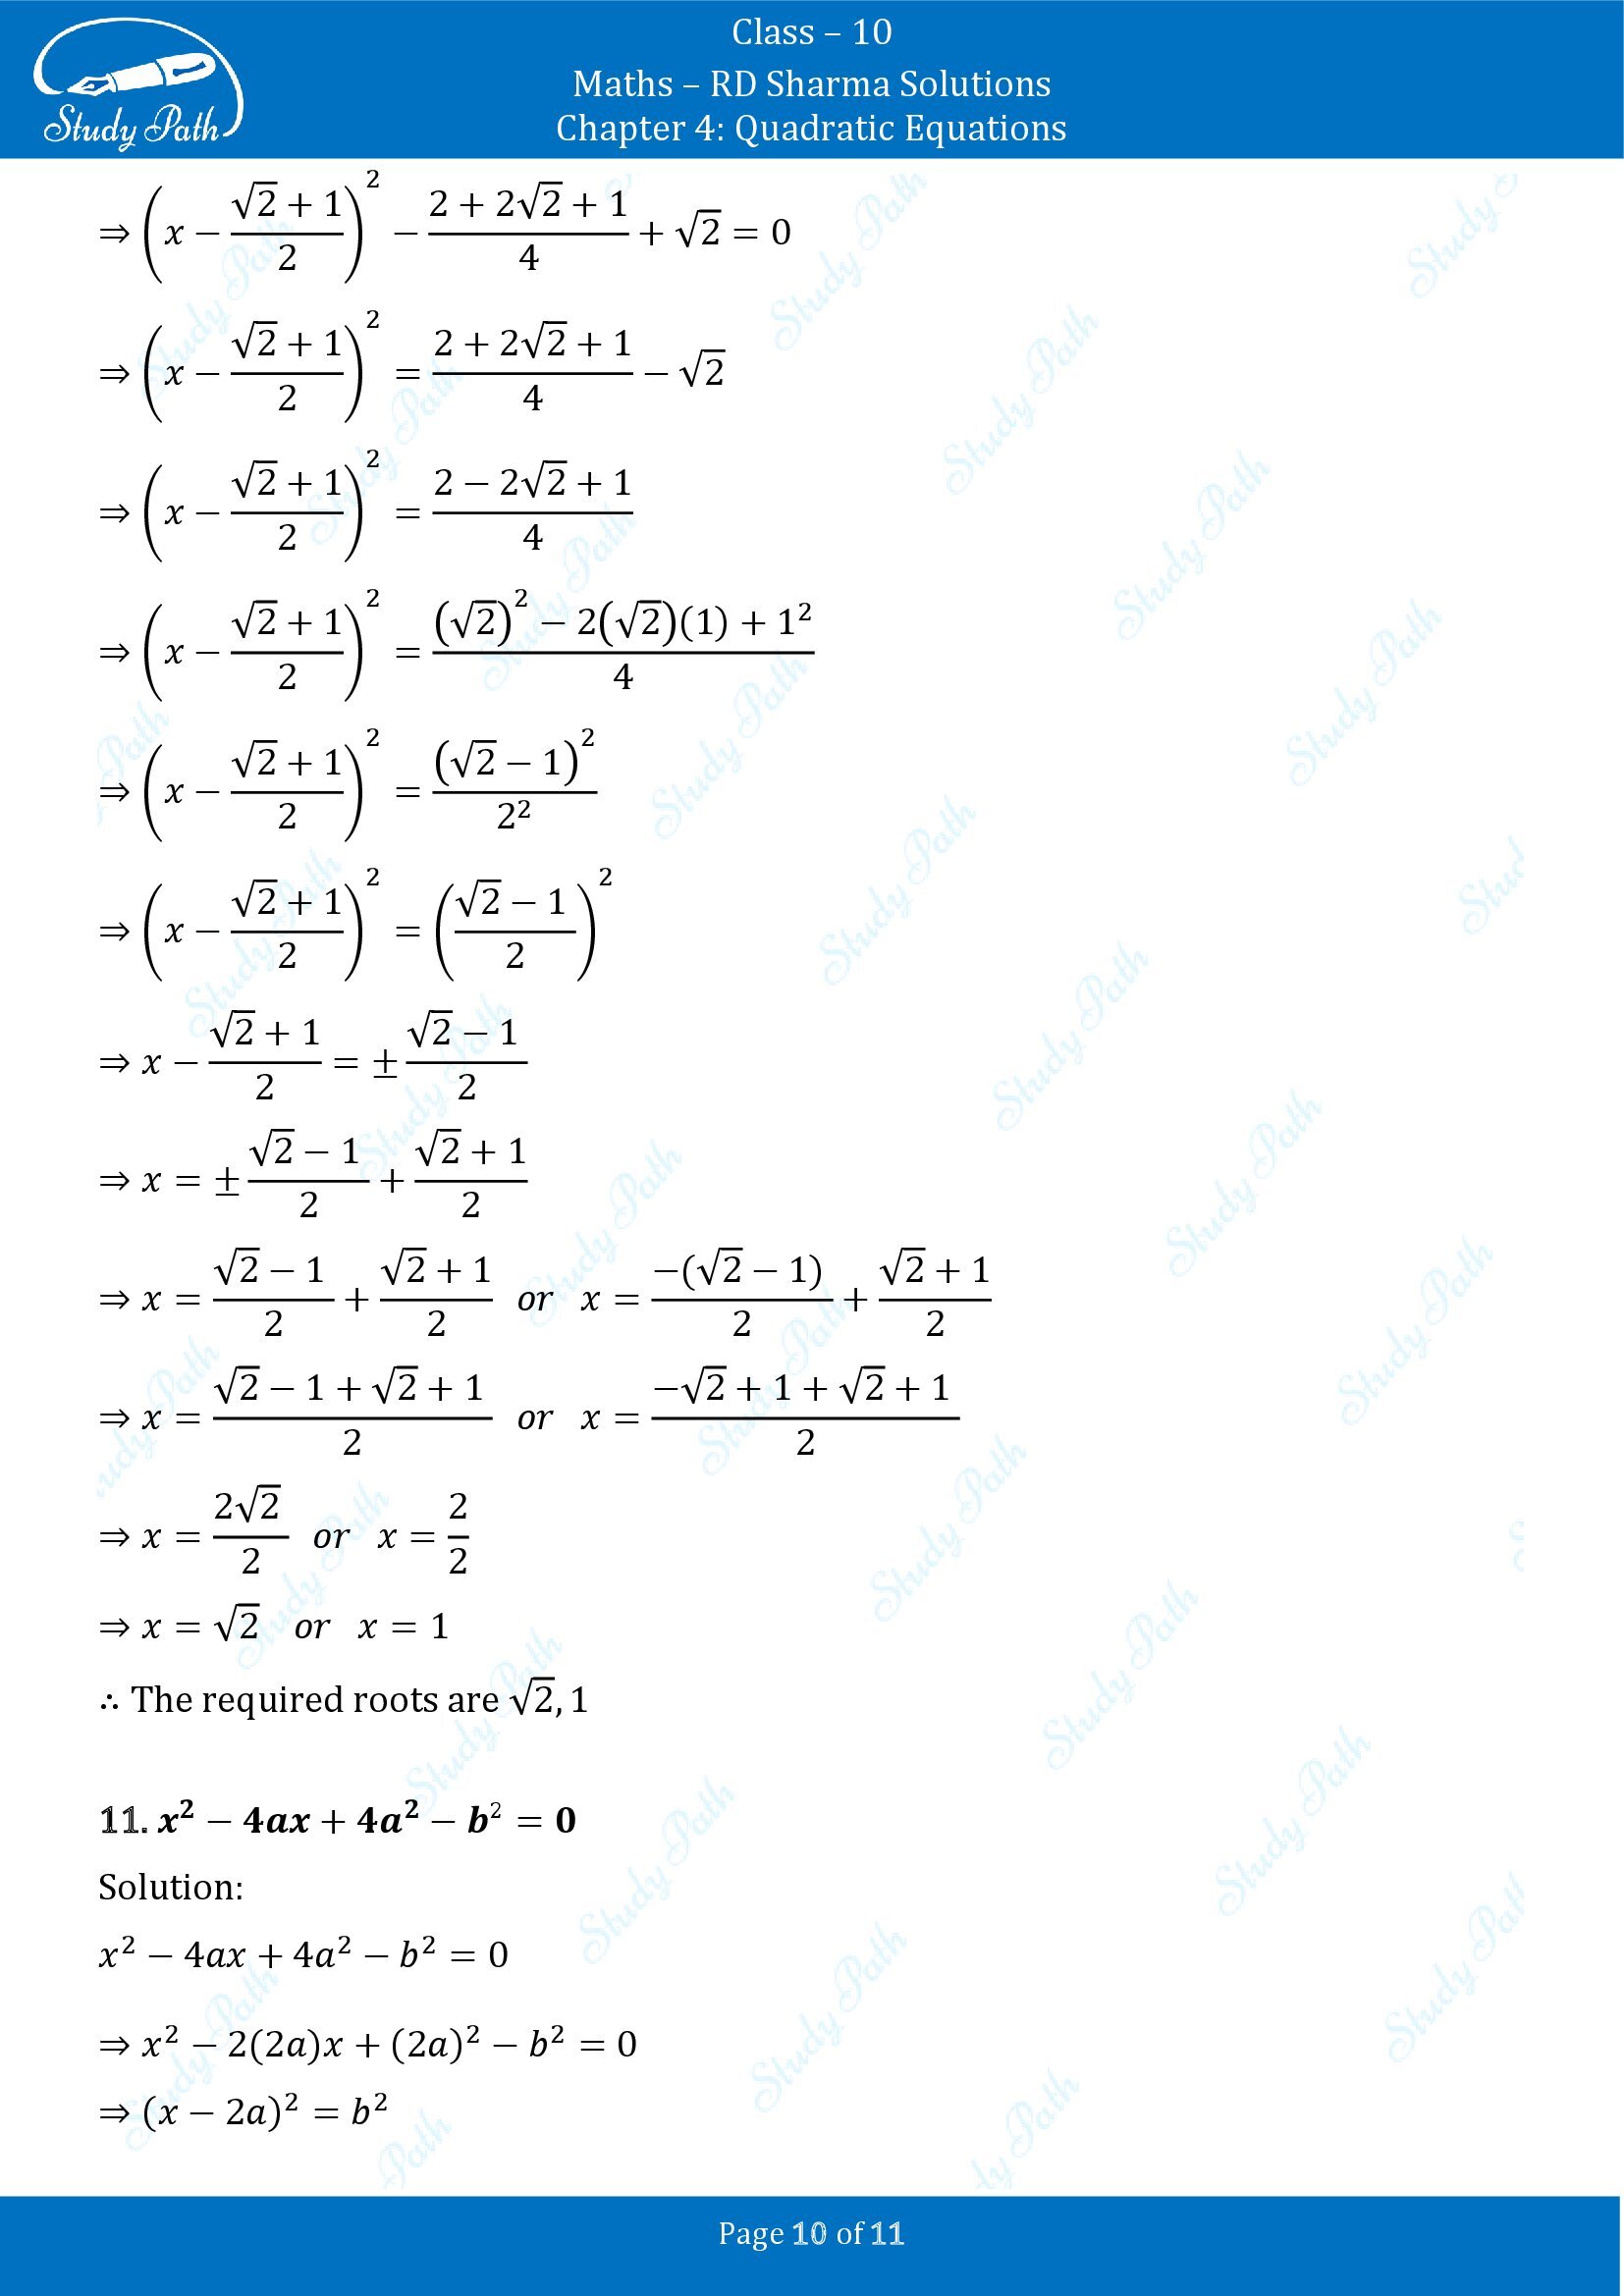 RD Sharma Solutions Class 10 Chapter 4 Quadratic Equations Exercise 4.4 00010